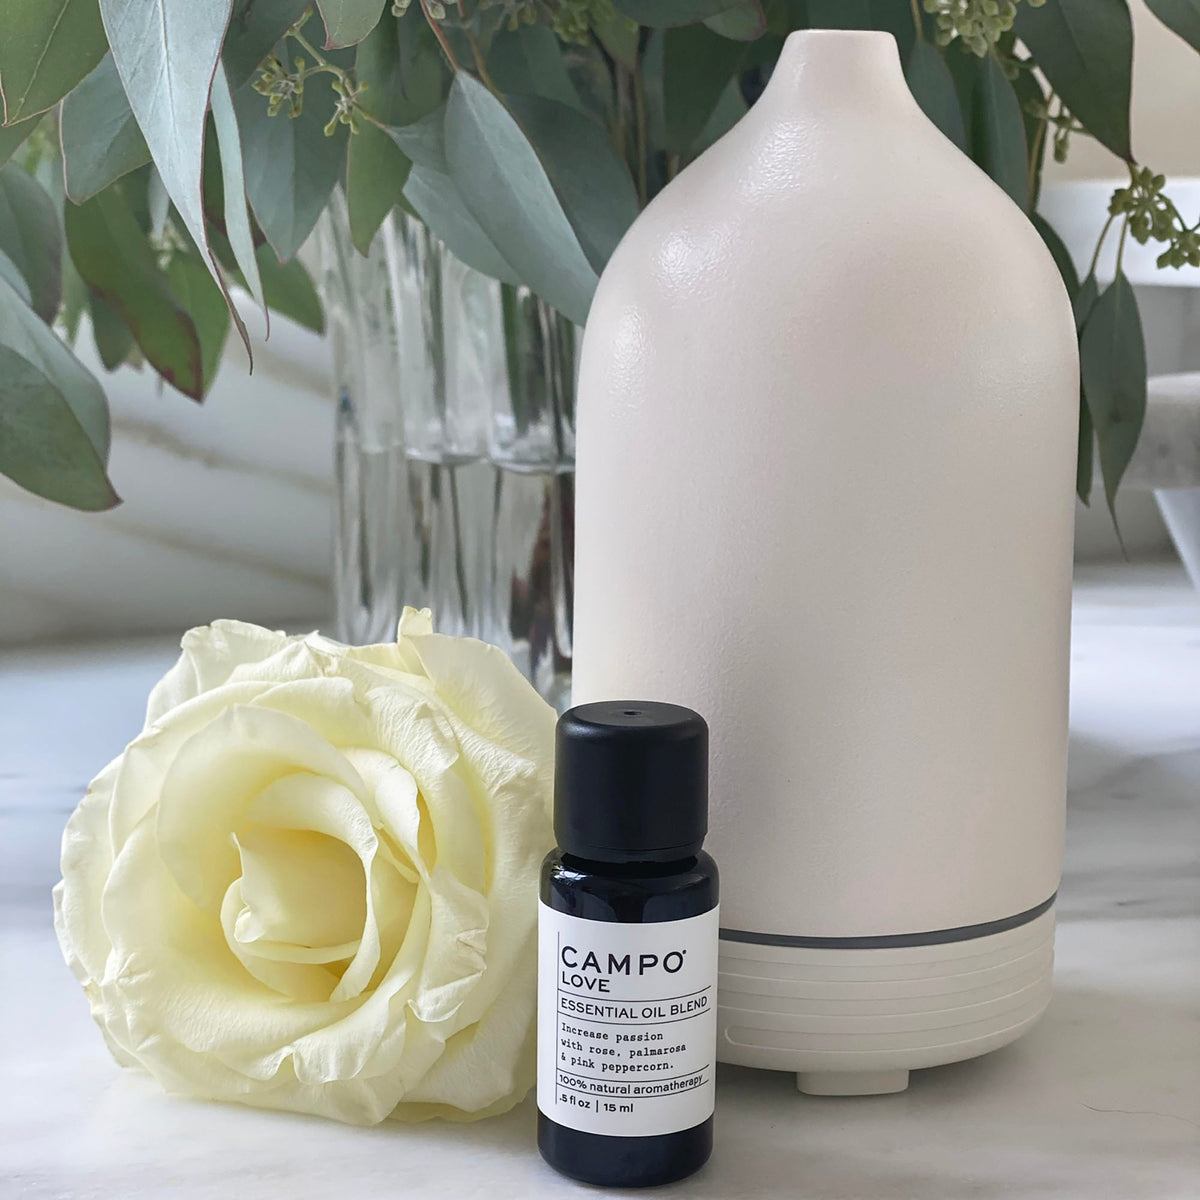 Campo Beauty LOVE Blend 15 ml Essential Oil. Inspires feelings of joy, positivity &amp; connection with this 100% natural pure essential oil blend of Rose, Wild Palmarosa, Black Pepper &amp; Pink Peppercorn.